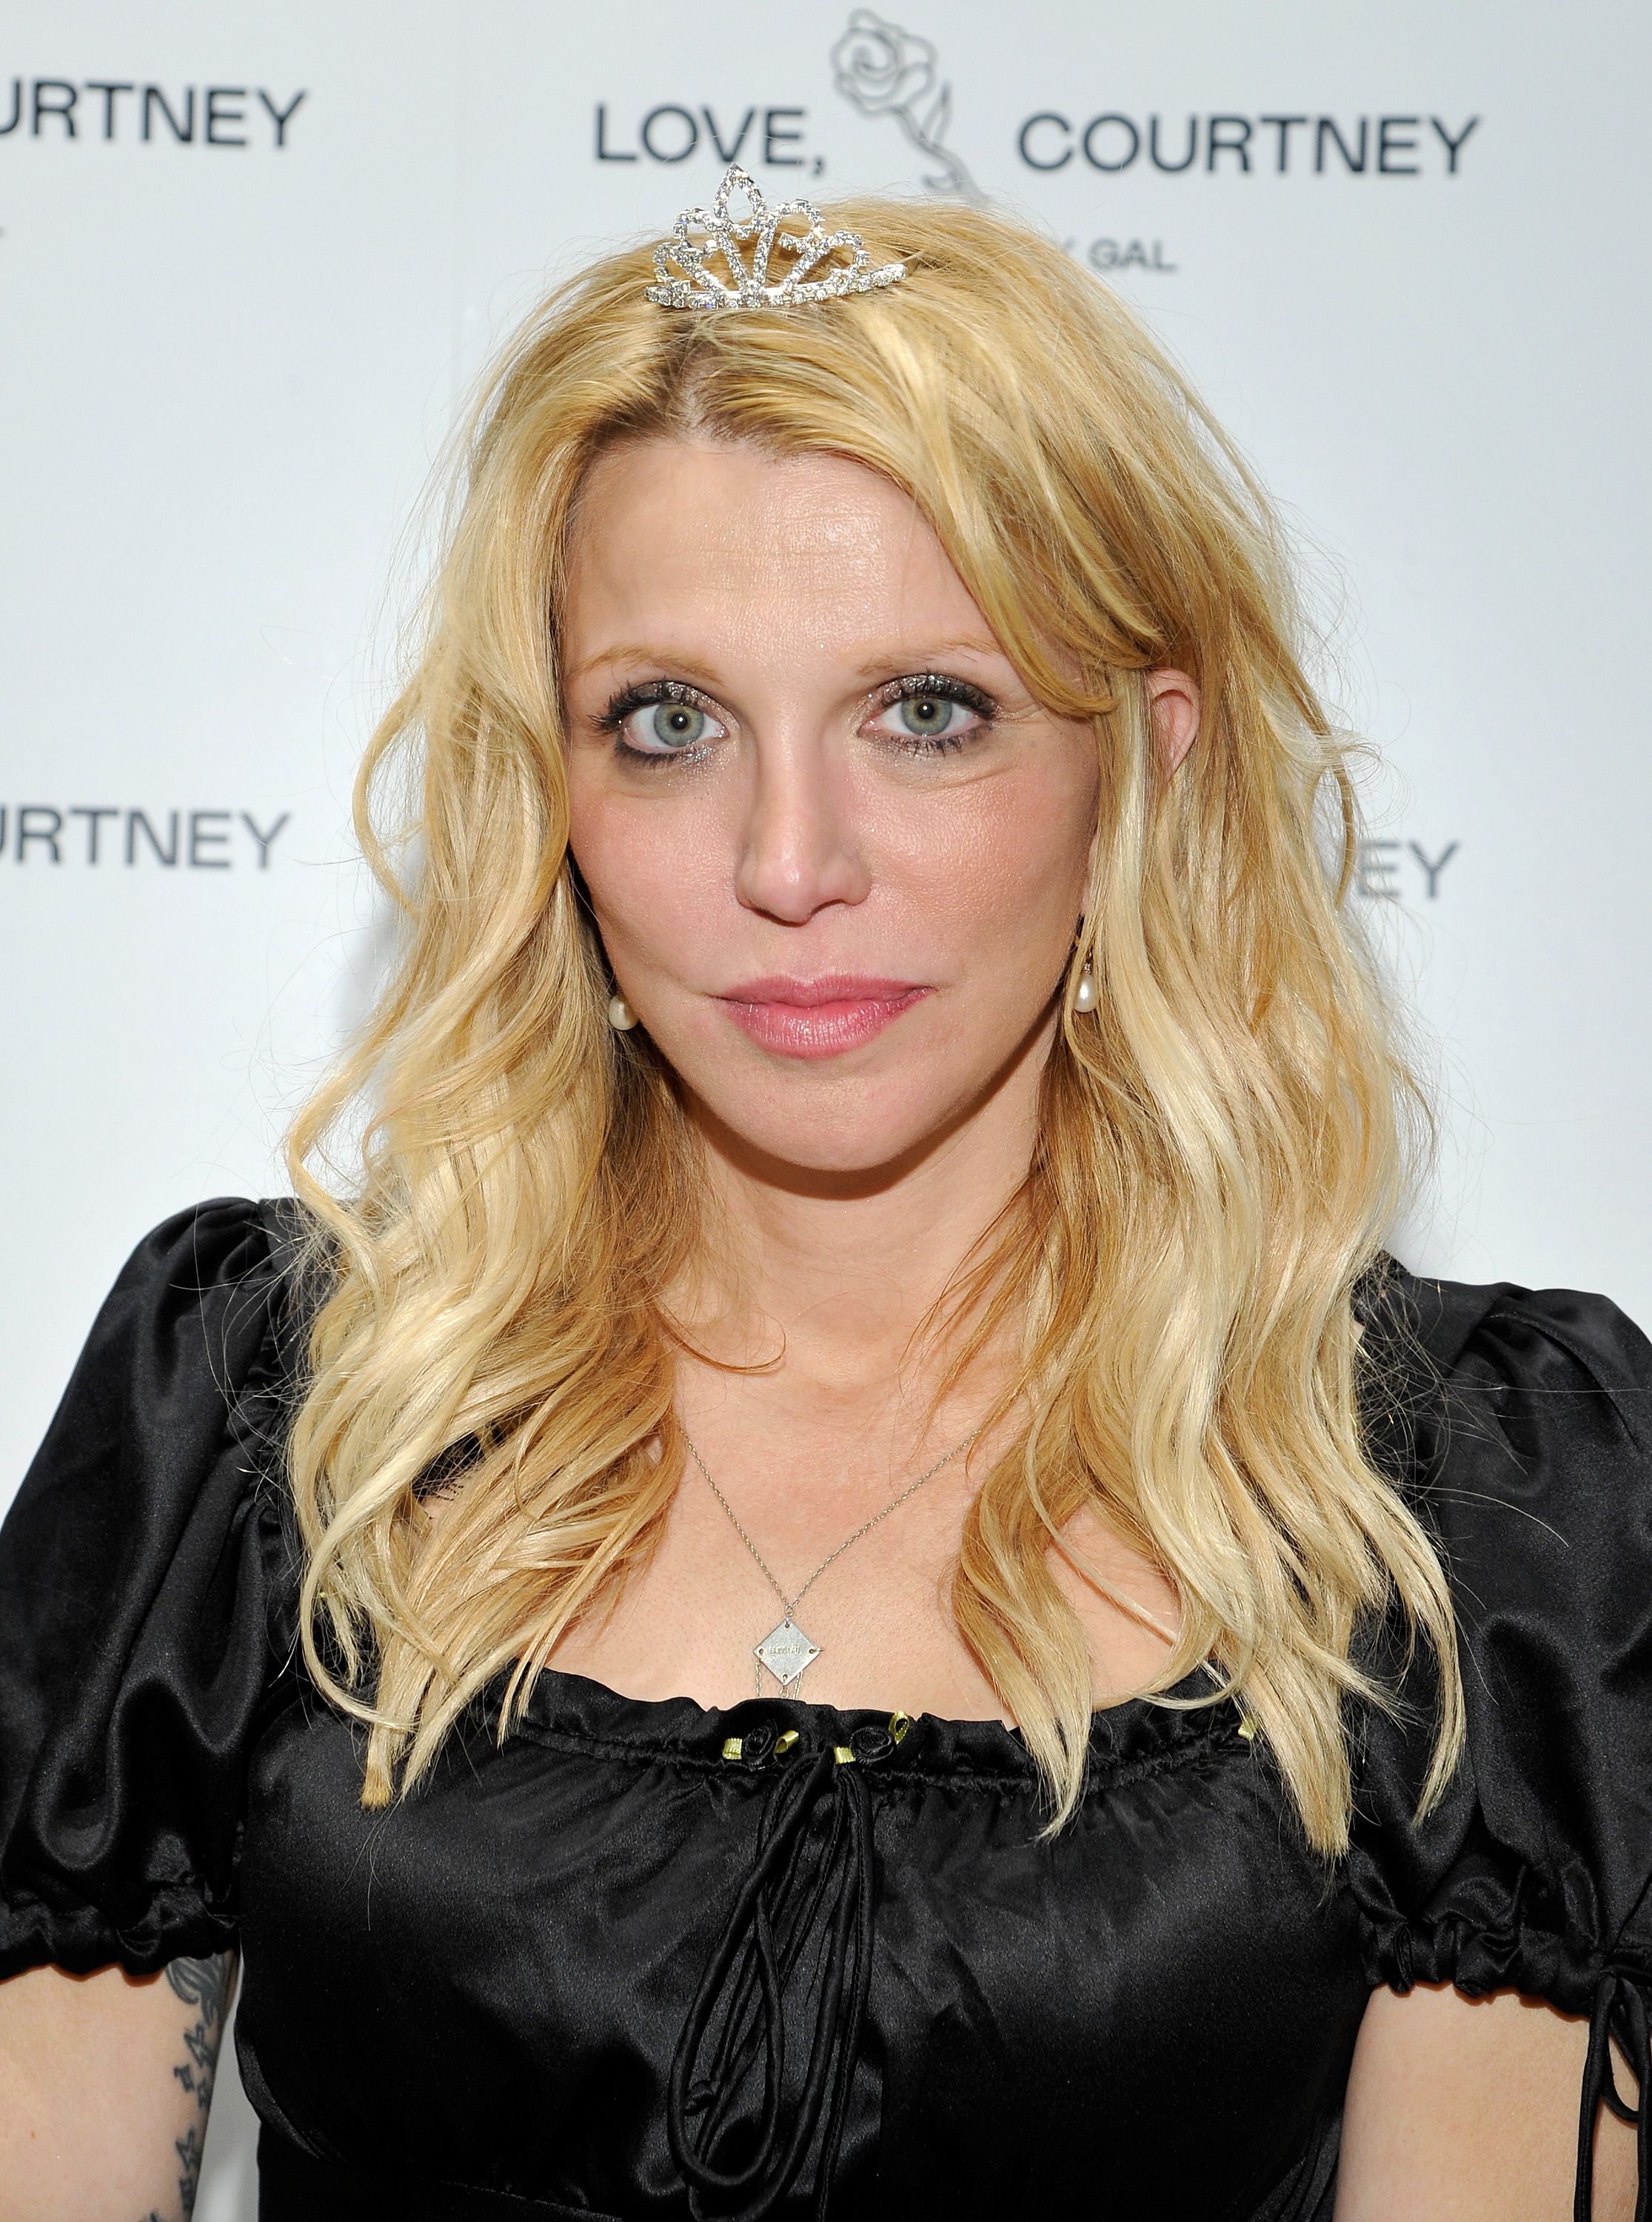 Courtney Love attends Love, Courtney by Nasty Gal launch party. | Source: Getty Images